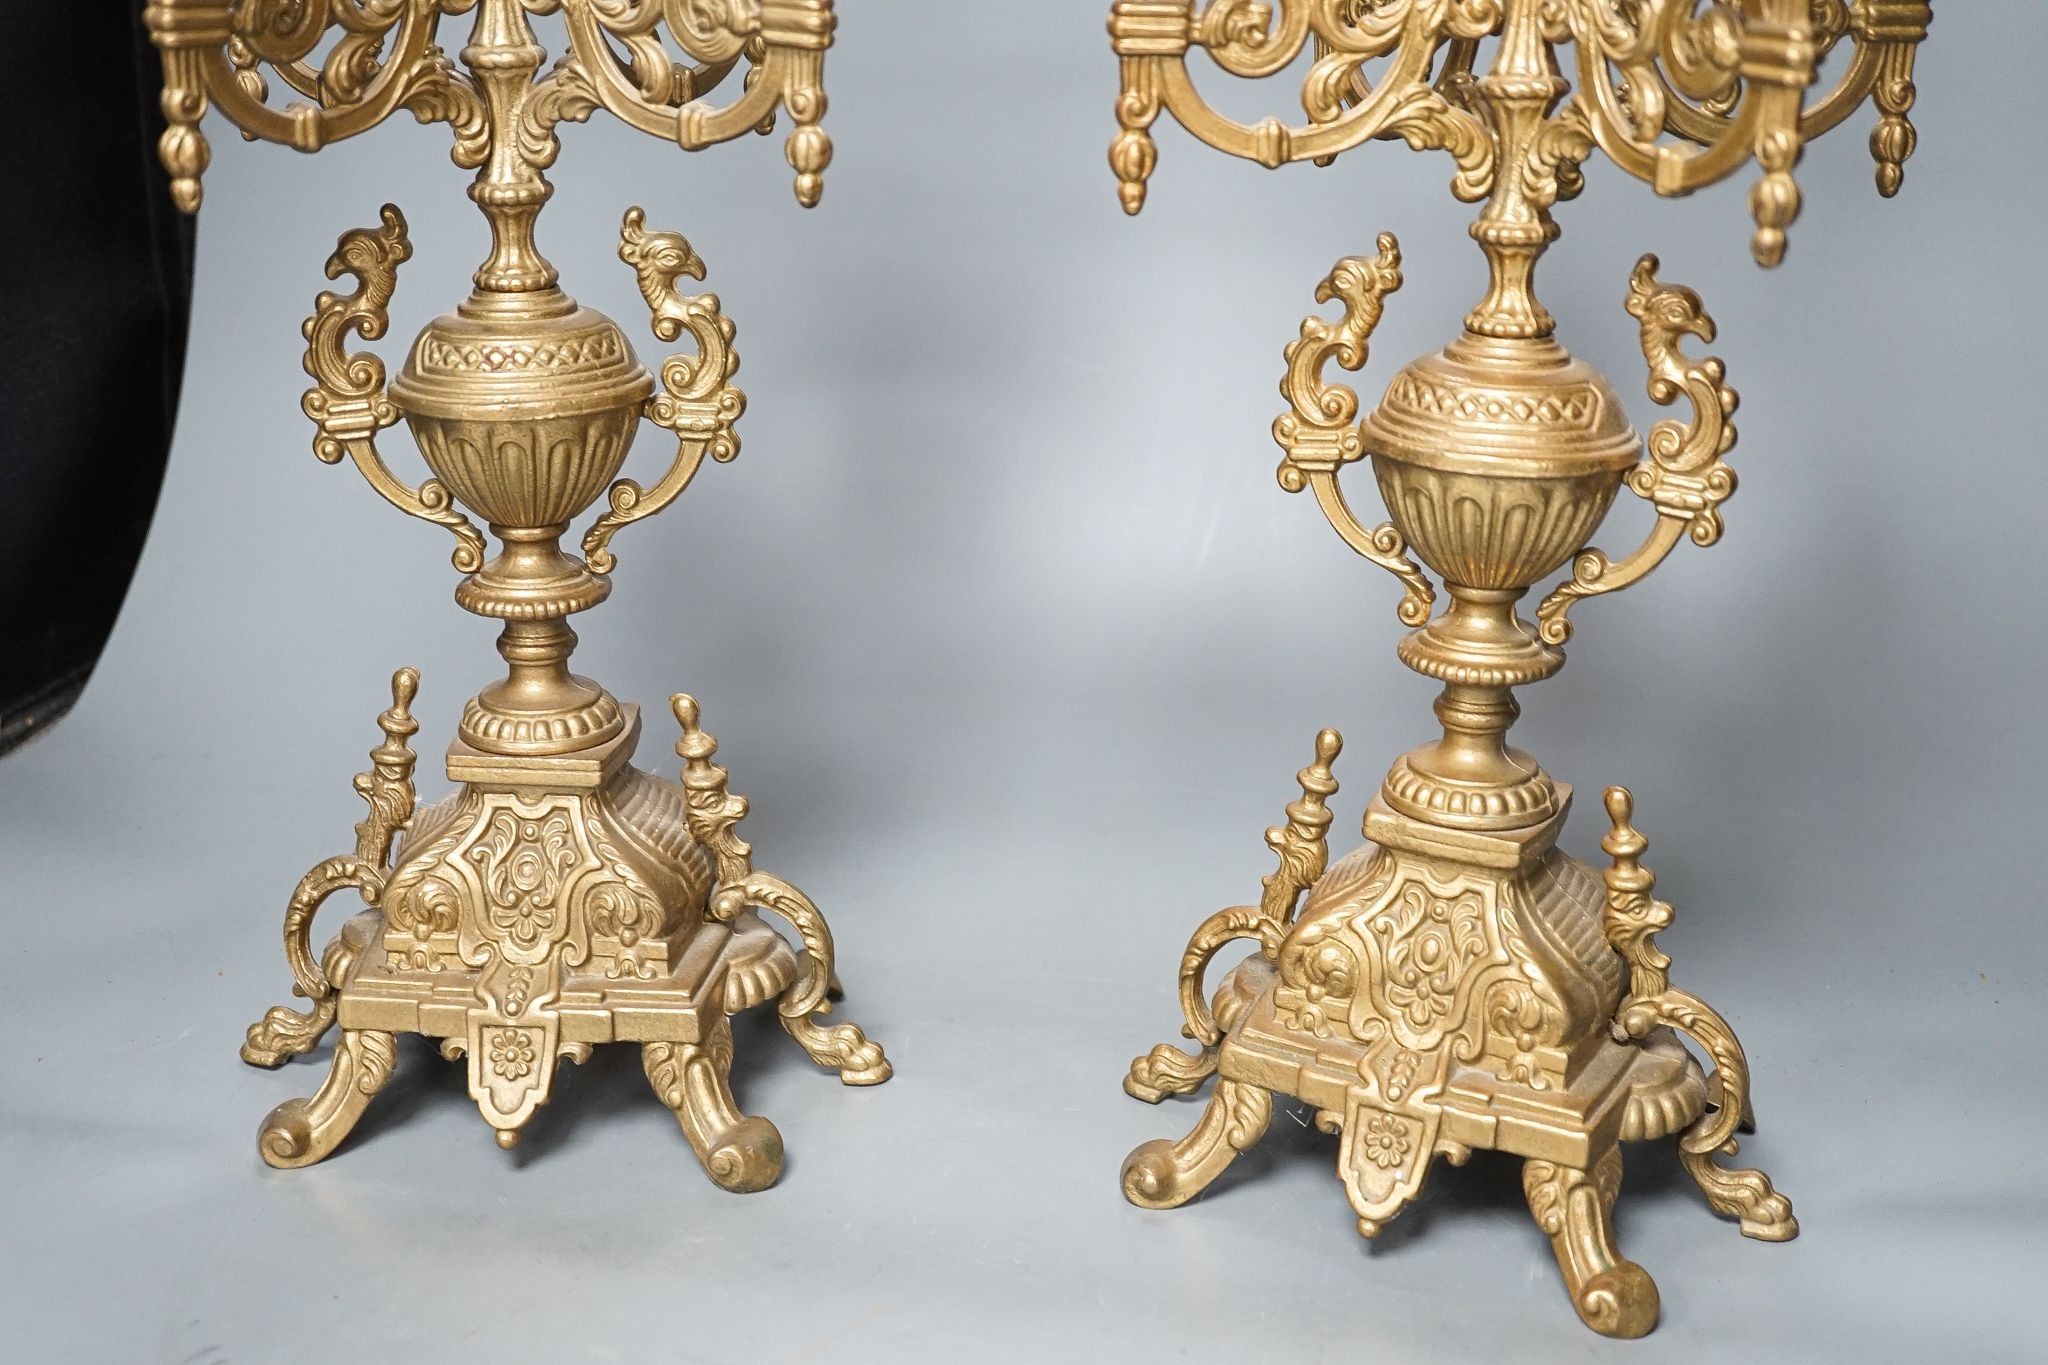 A large pair of ornate baroque style gilt-brass candelabra, 51cm